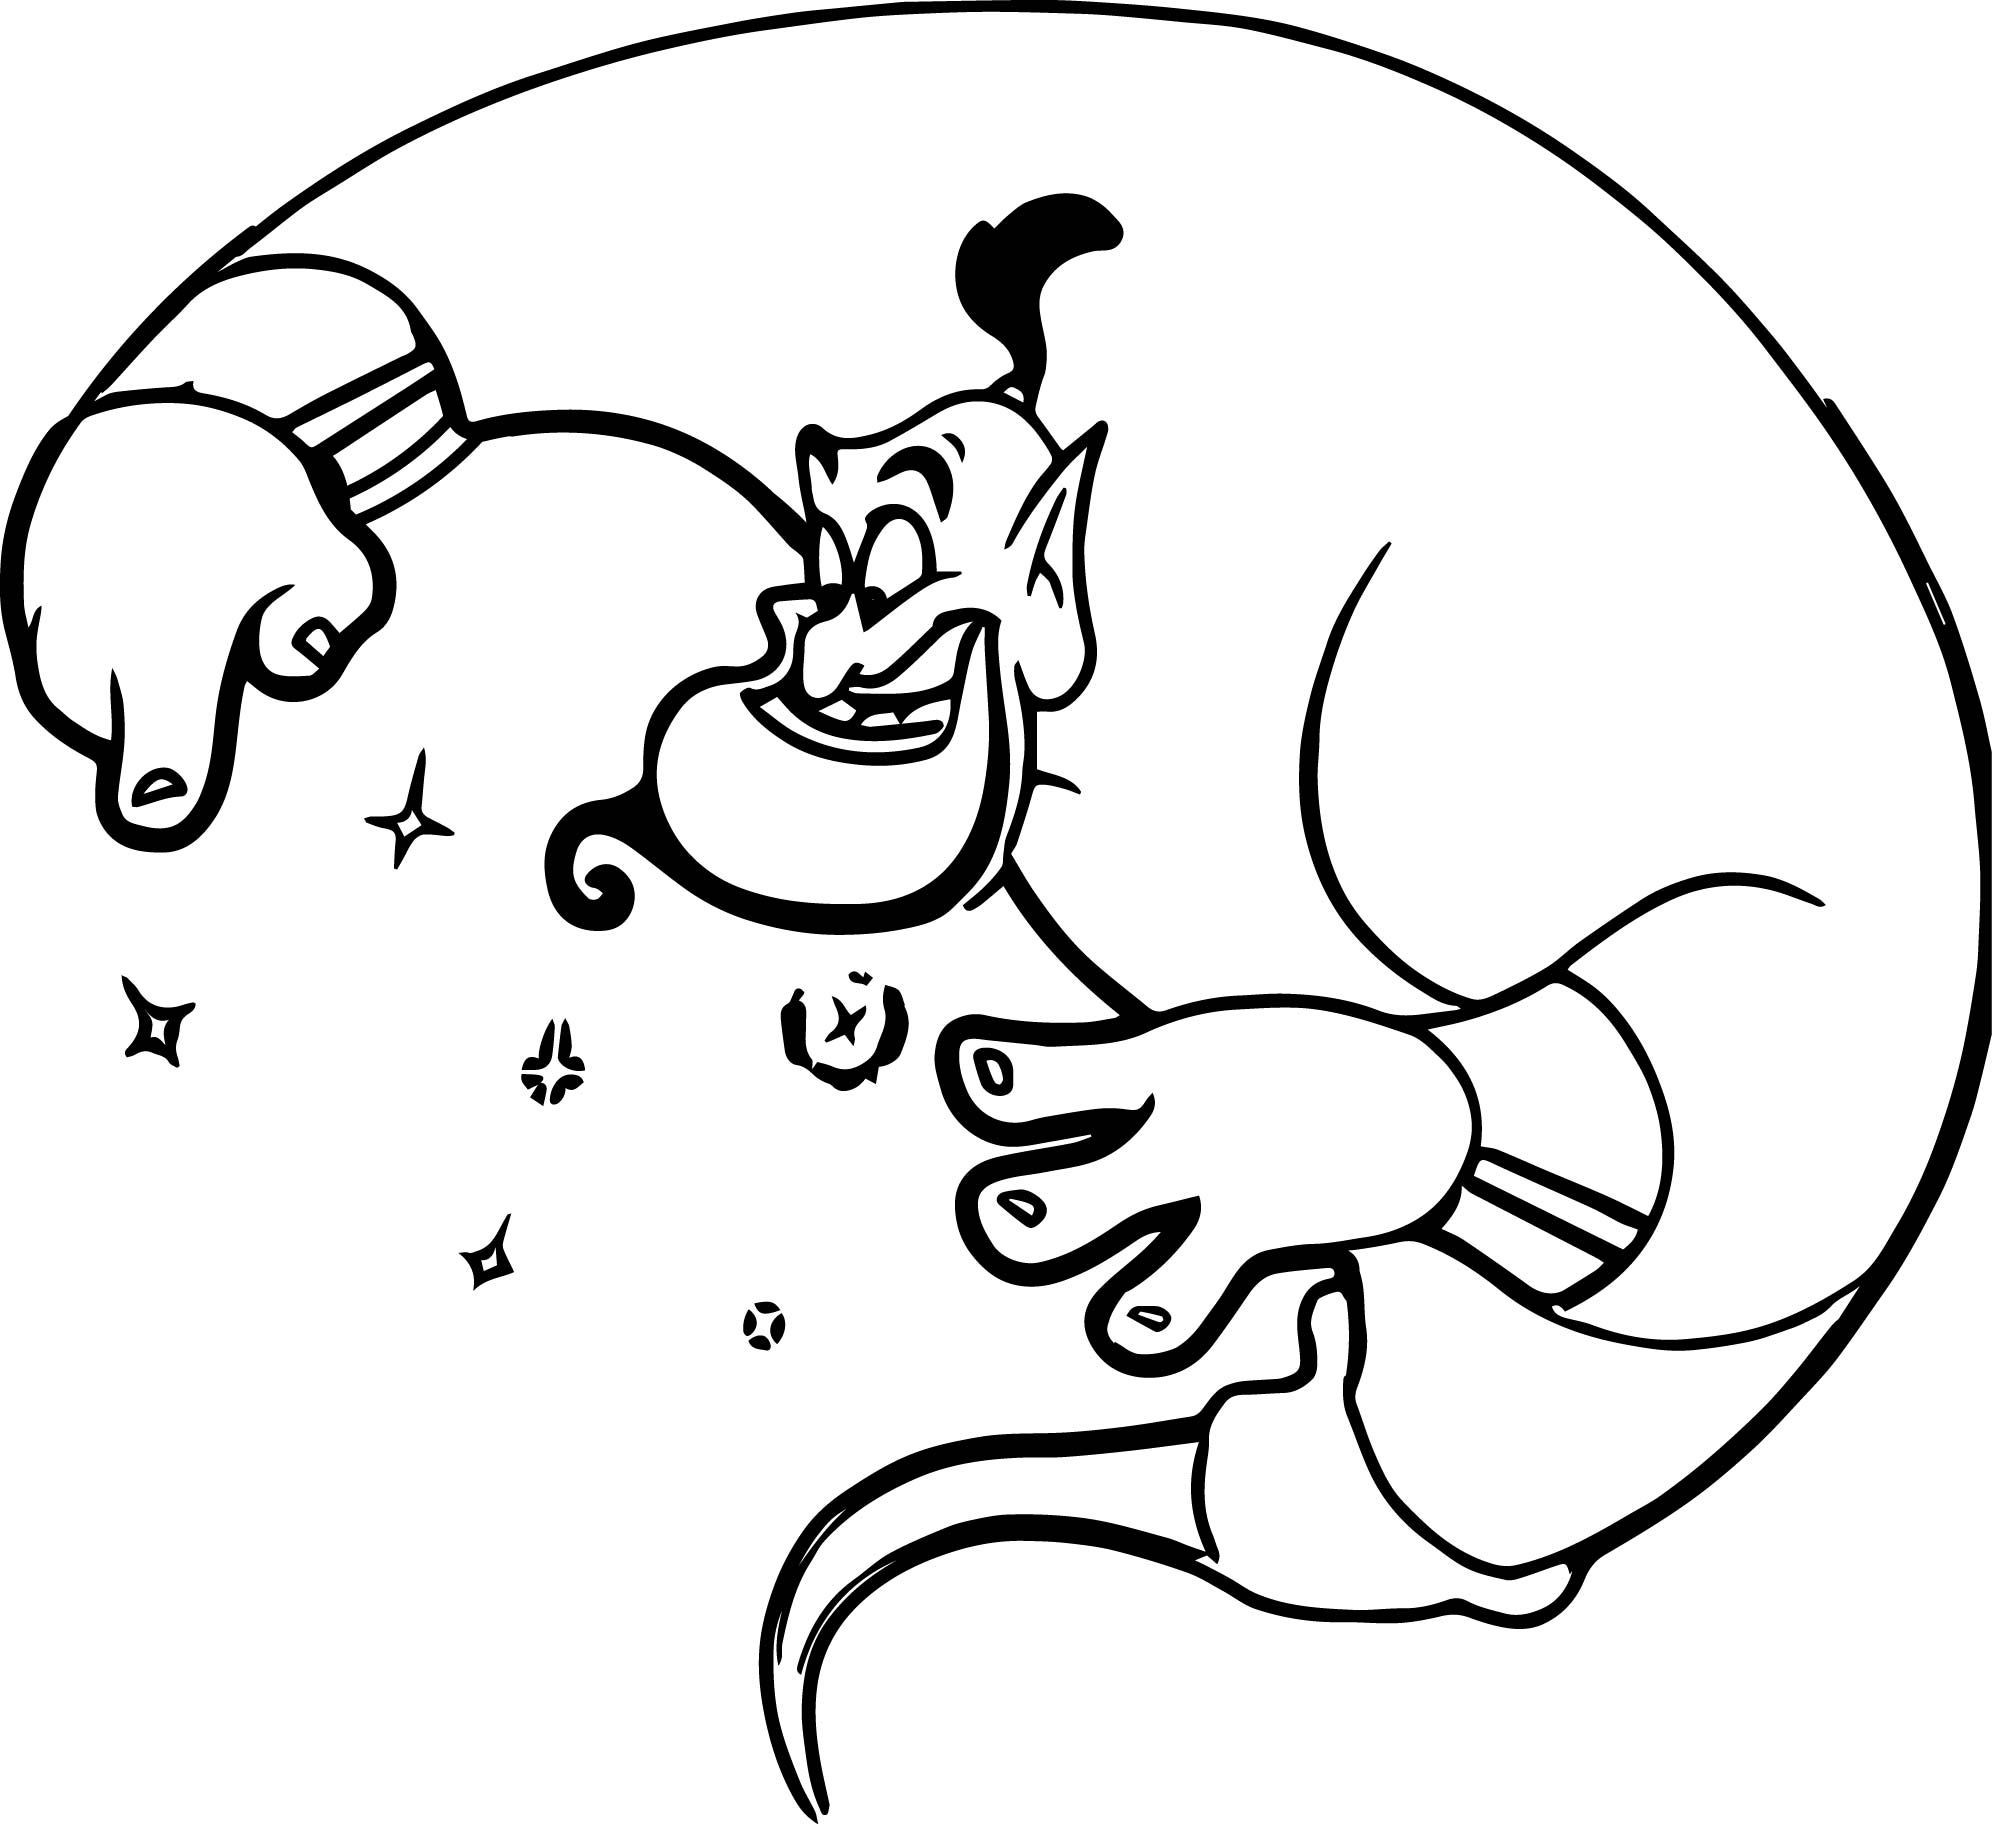 Coloring Pages : Free Coloring Disney Aladn Camping Theme Genie ...